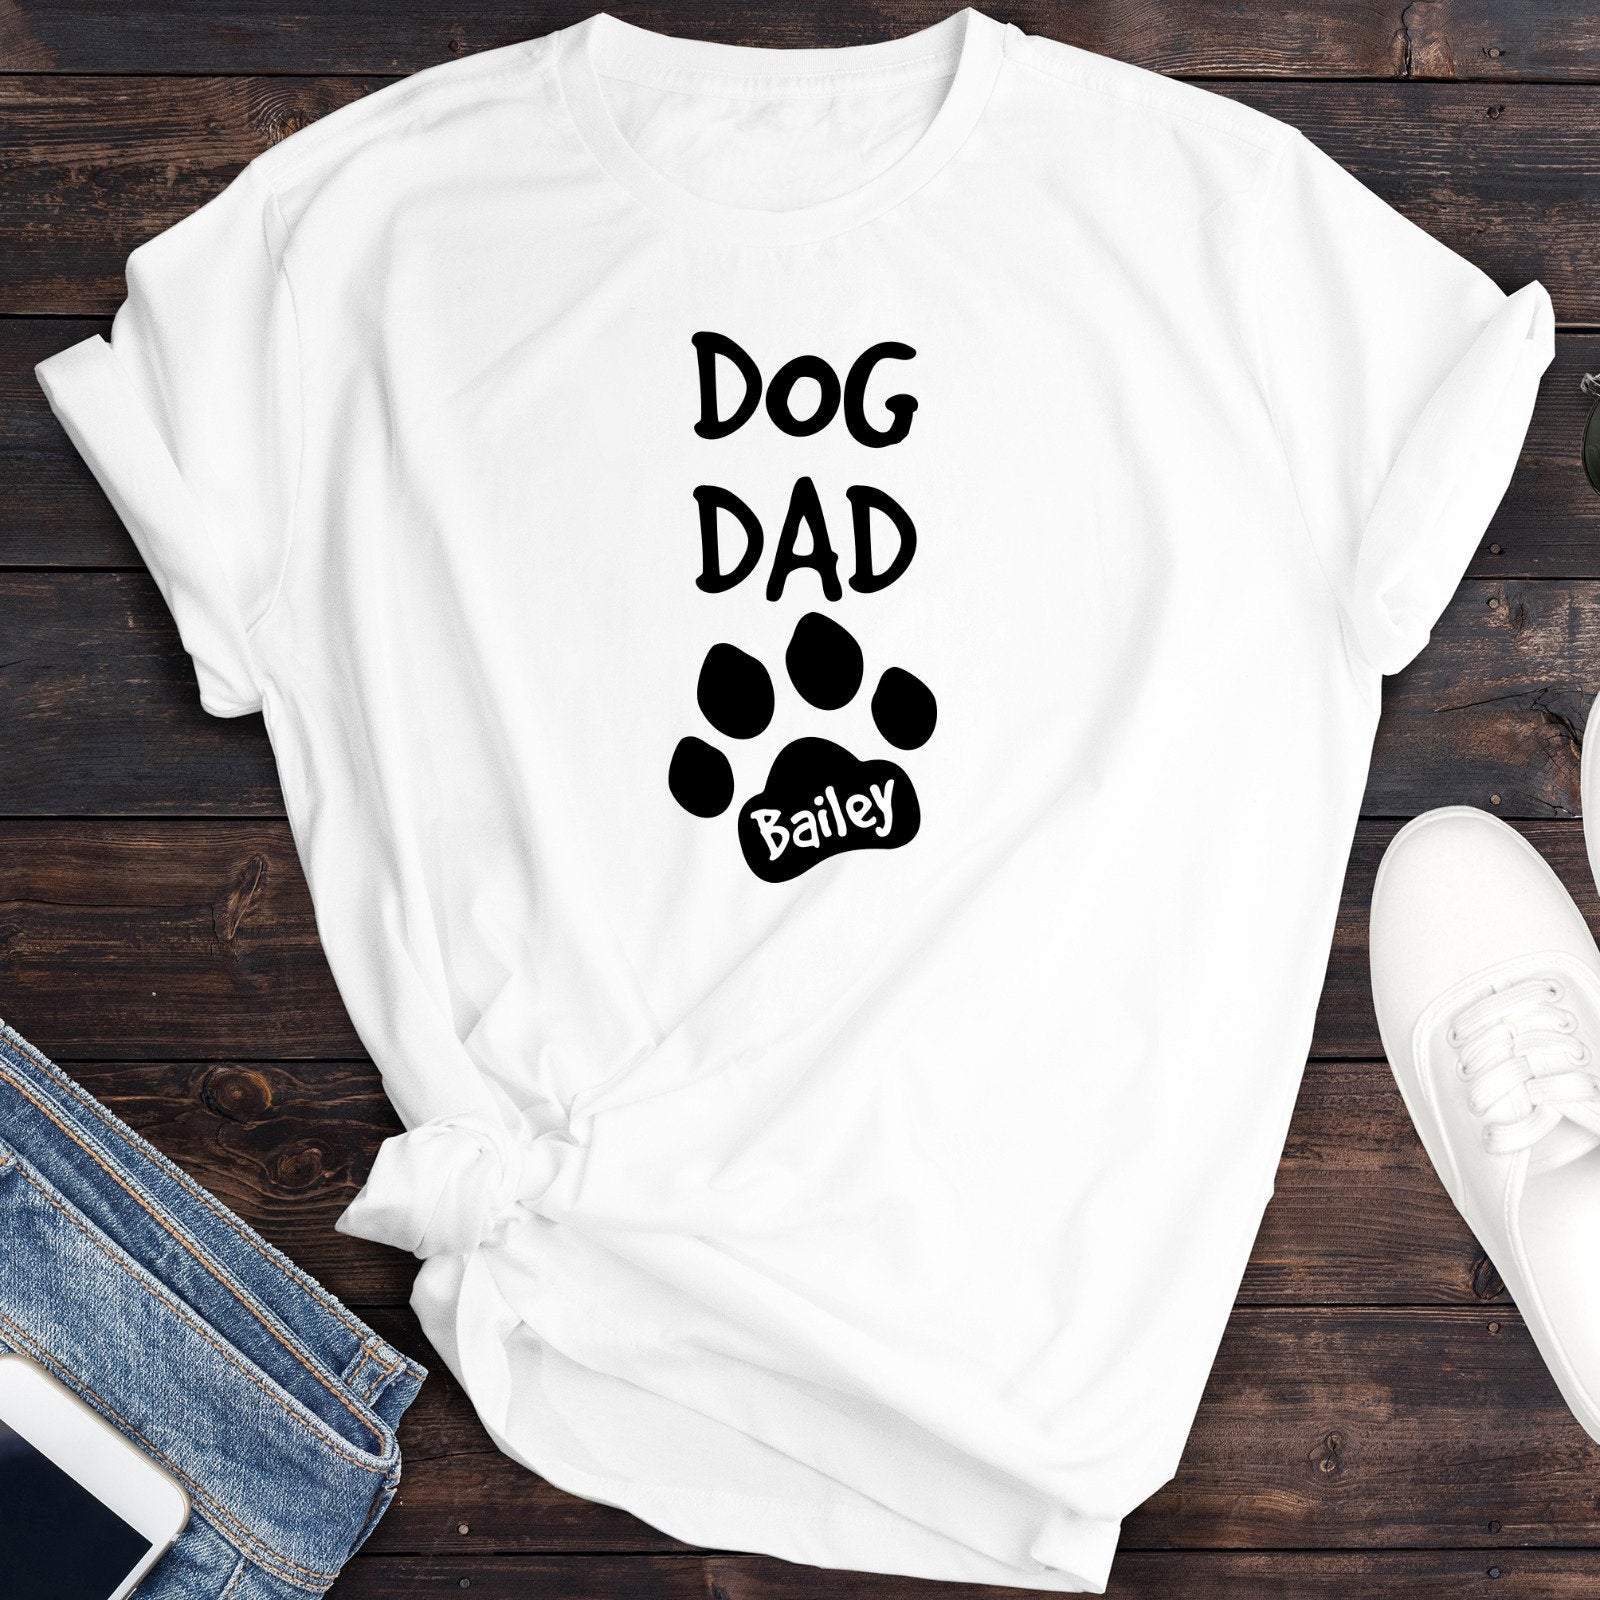 Dog Dad With A Dog Name, Paw Prints T-Shirt, Father's Day Gift, Gift For Dog Lover Or Pet Lover